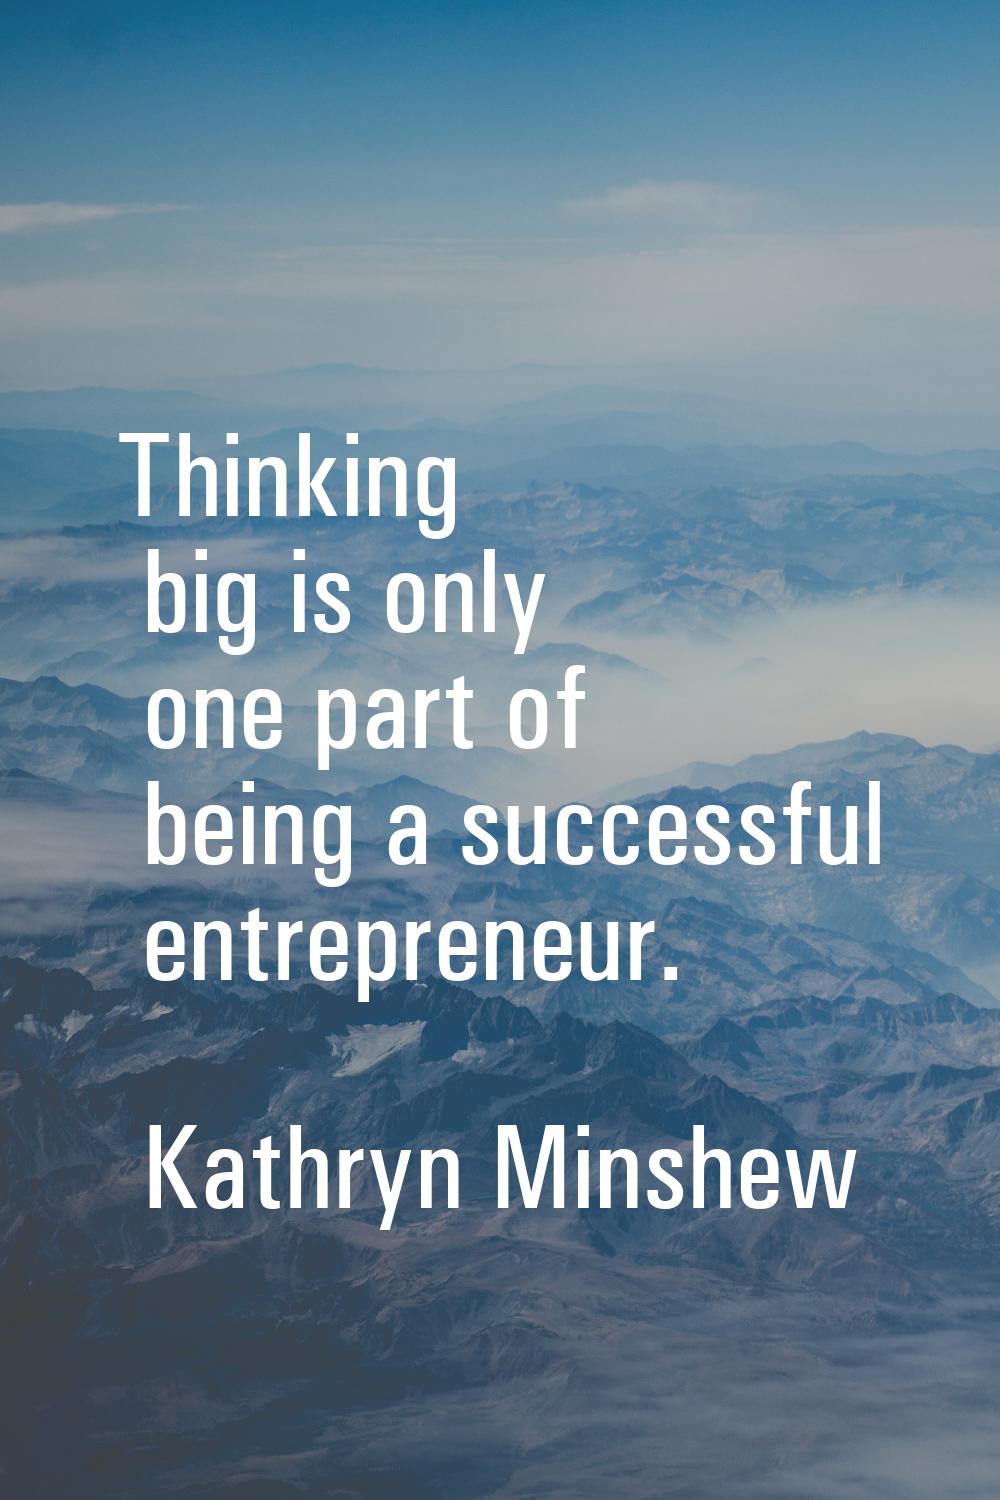 Thinking big is only one part of being a successful entrepreneur.